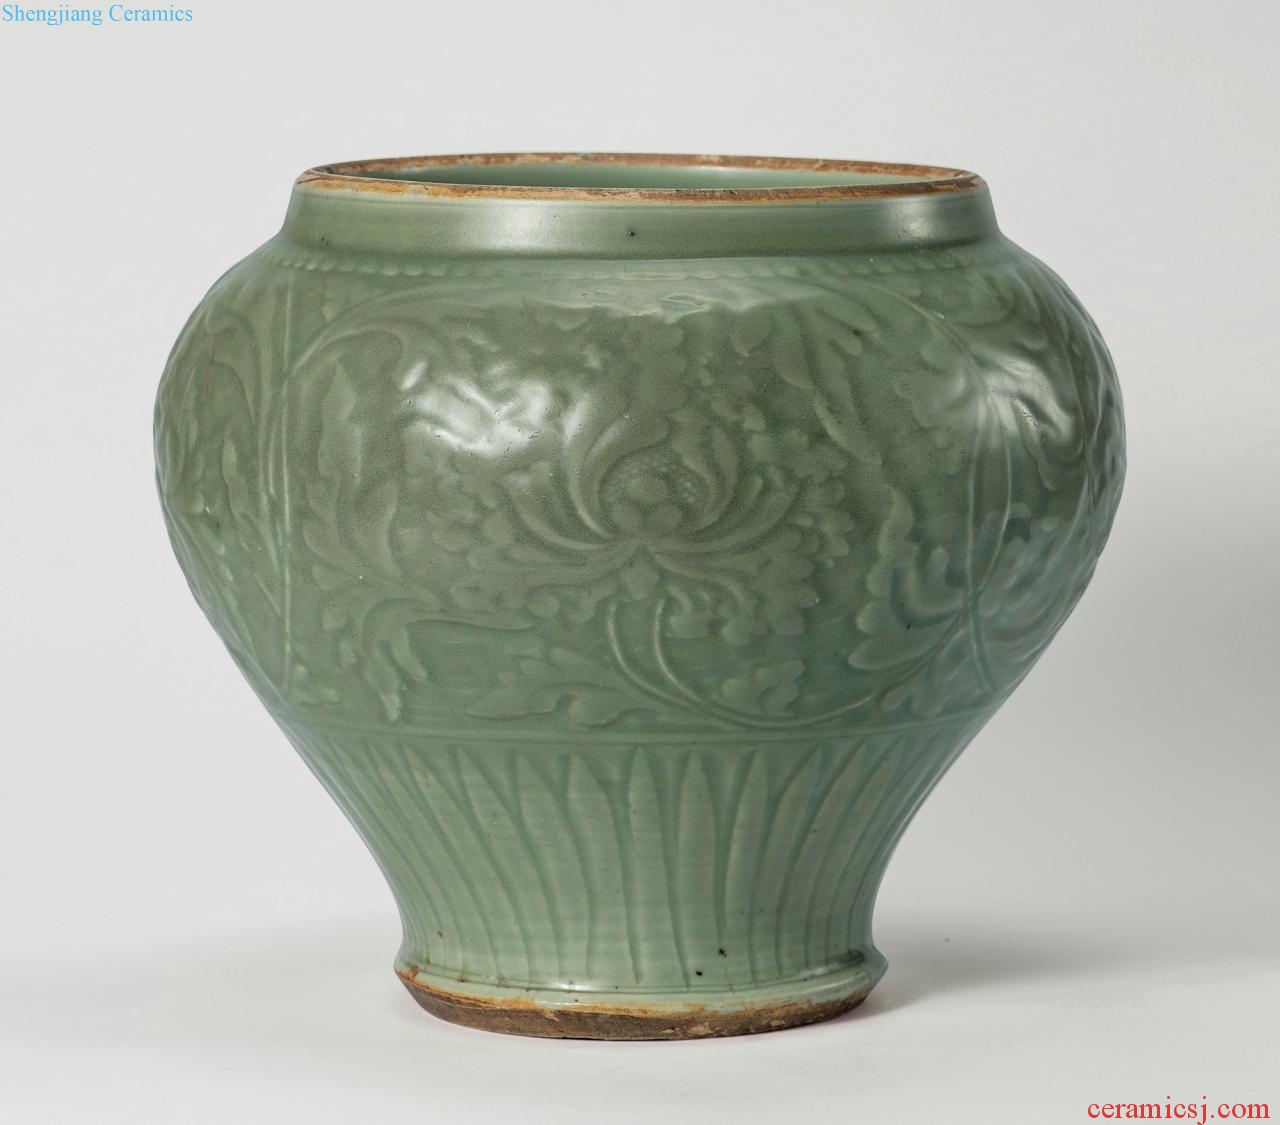 In the 14th century Longquan celadon glaze peony grains cans